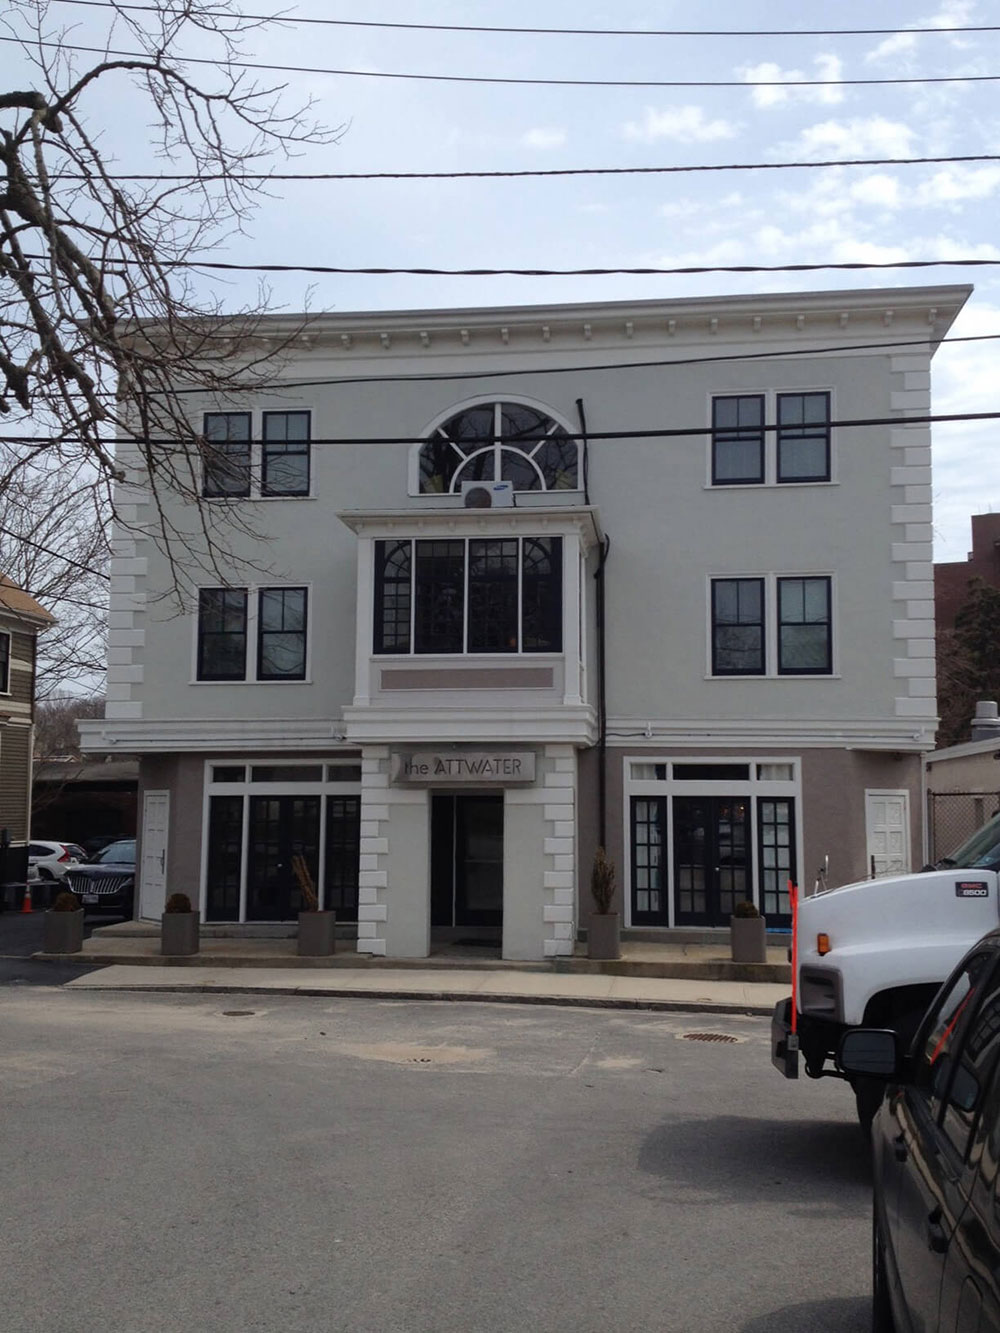 Black double-hung windows on the front of The Attwater in Newport, RI